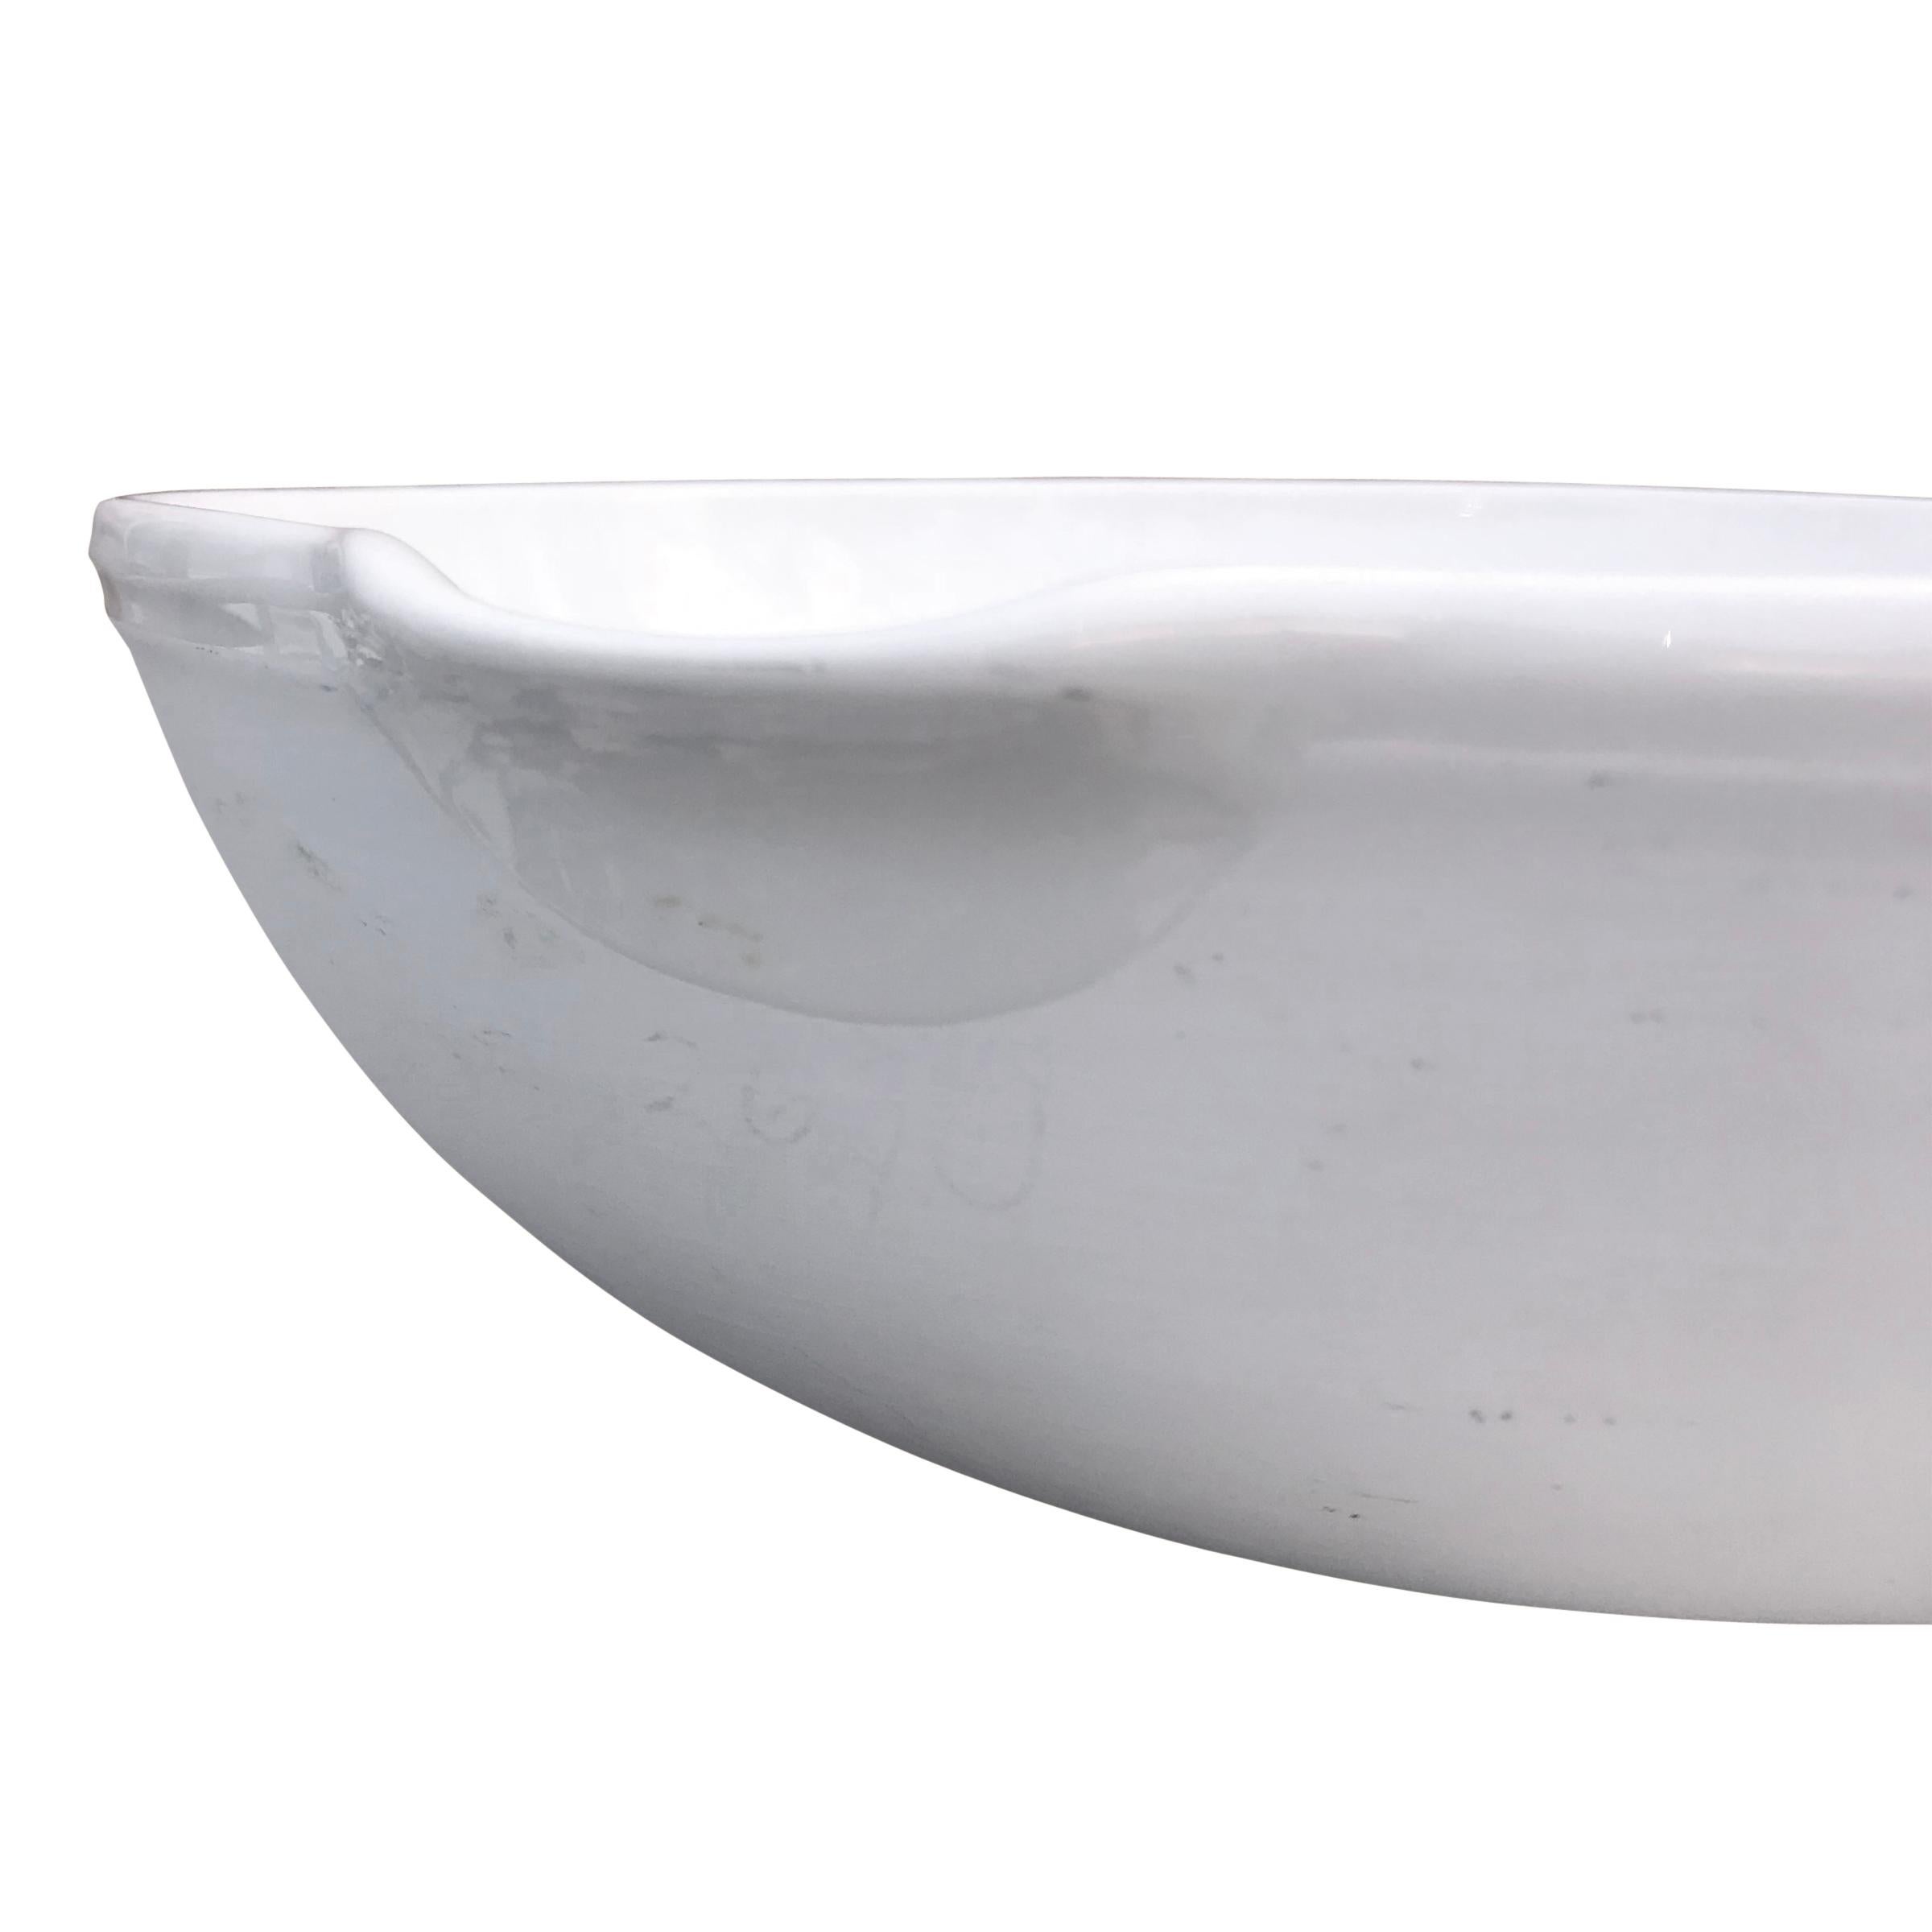 Country Coors Porcelain Company Evaporating Dish For Sale